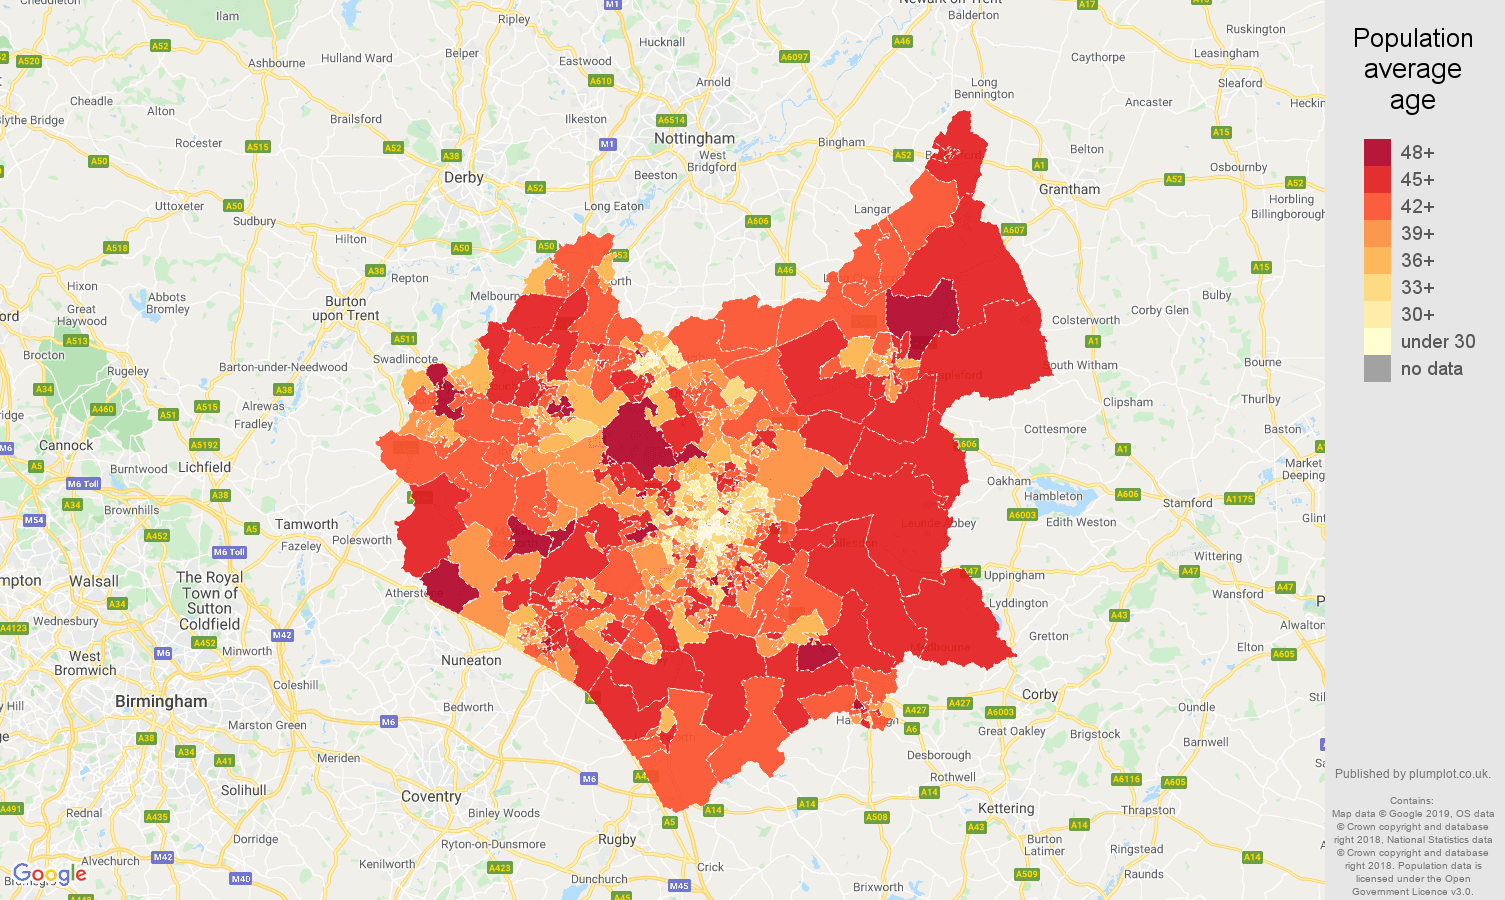 Leicestershire population average age map